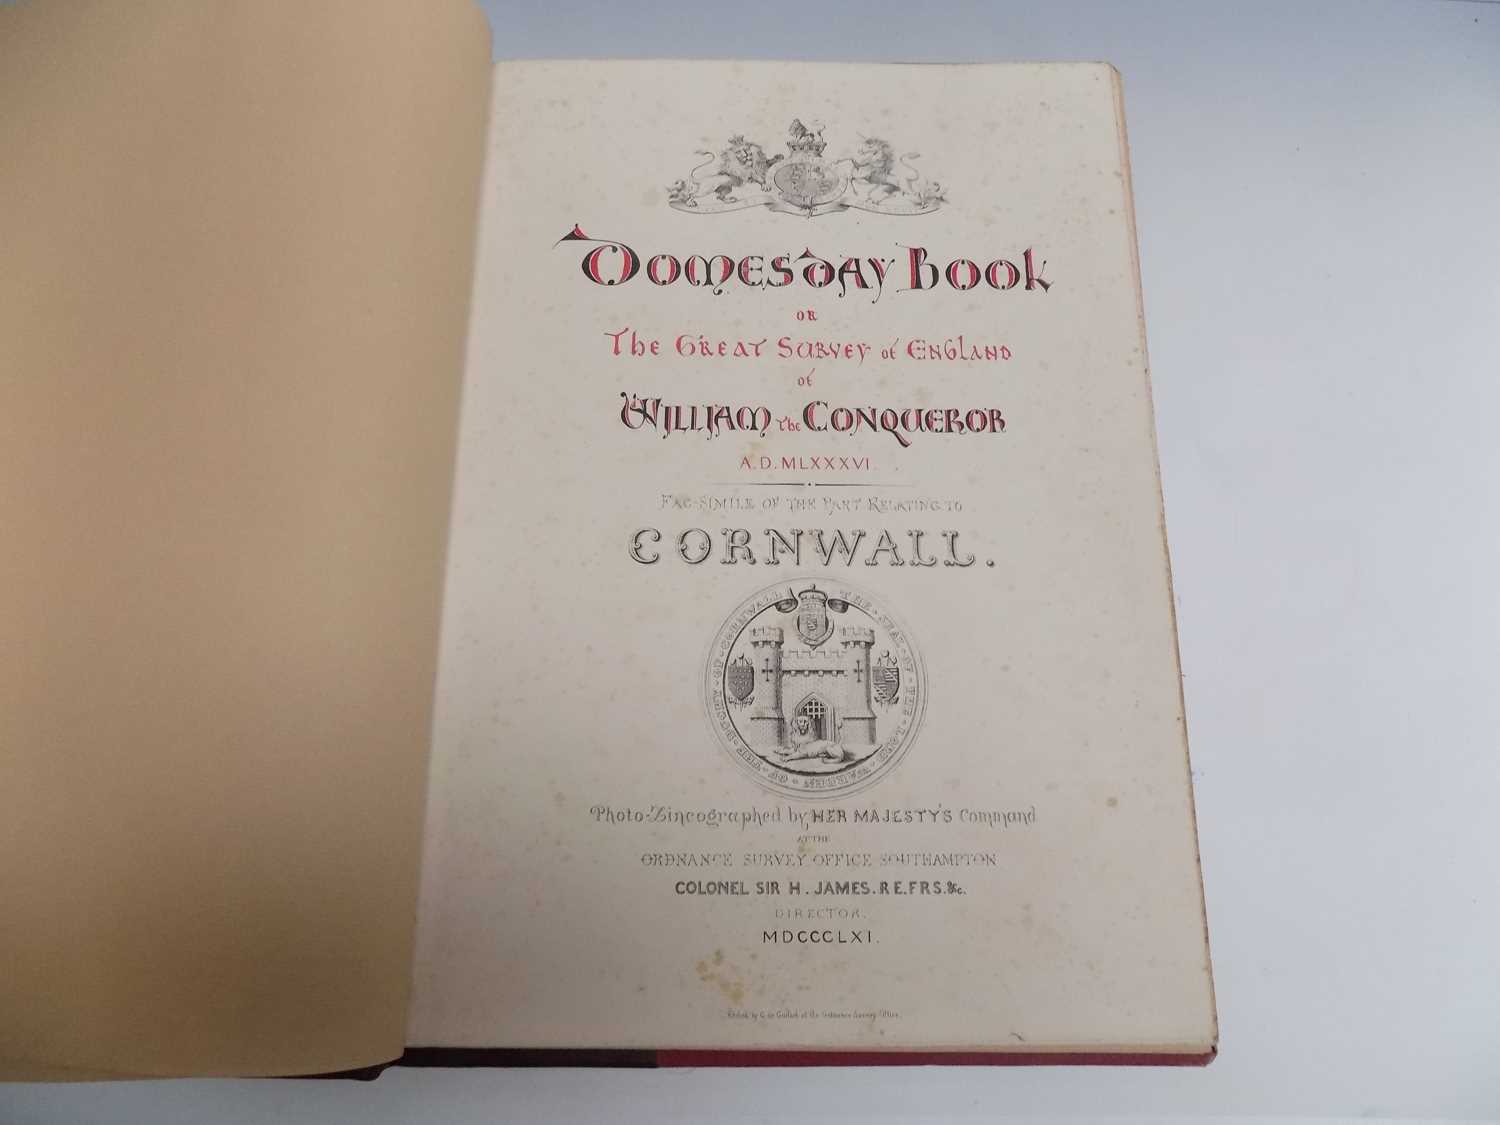 Lot 1277 - "Domesday Book...Cornwall." the 1861 edition.